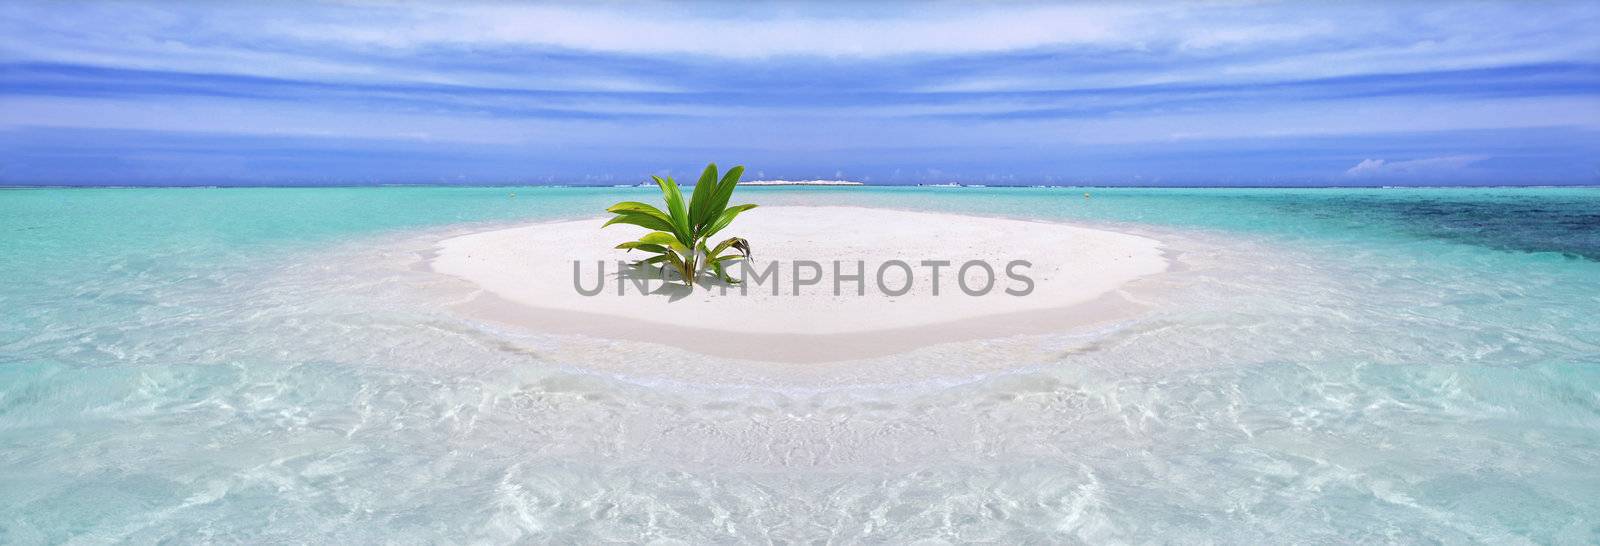 Tropical island with palm by fyletto